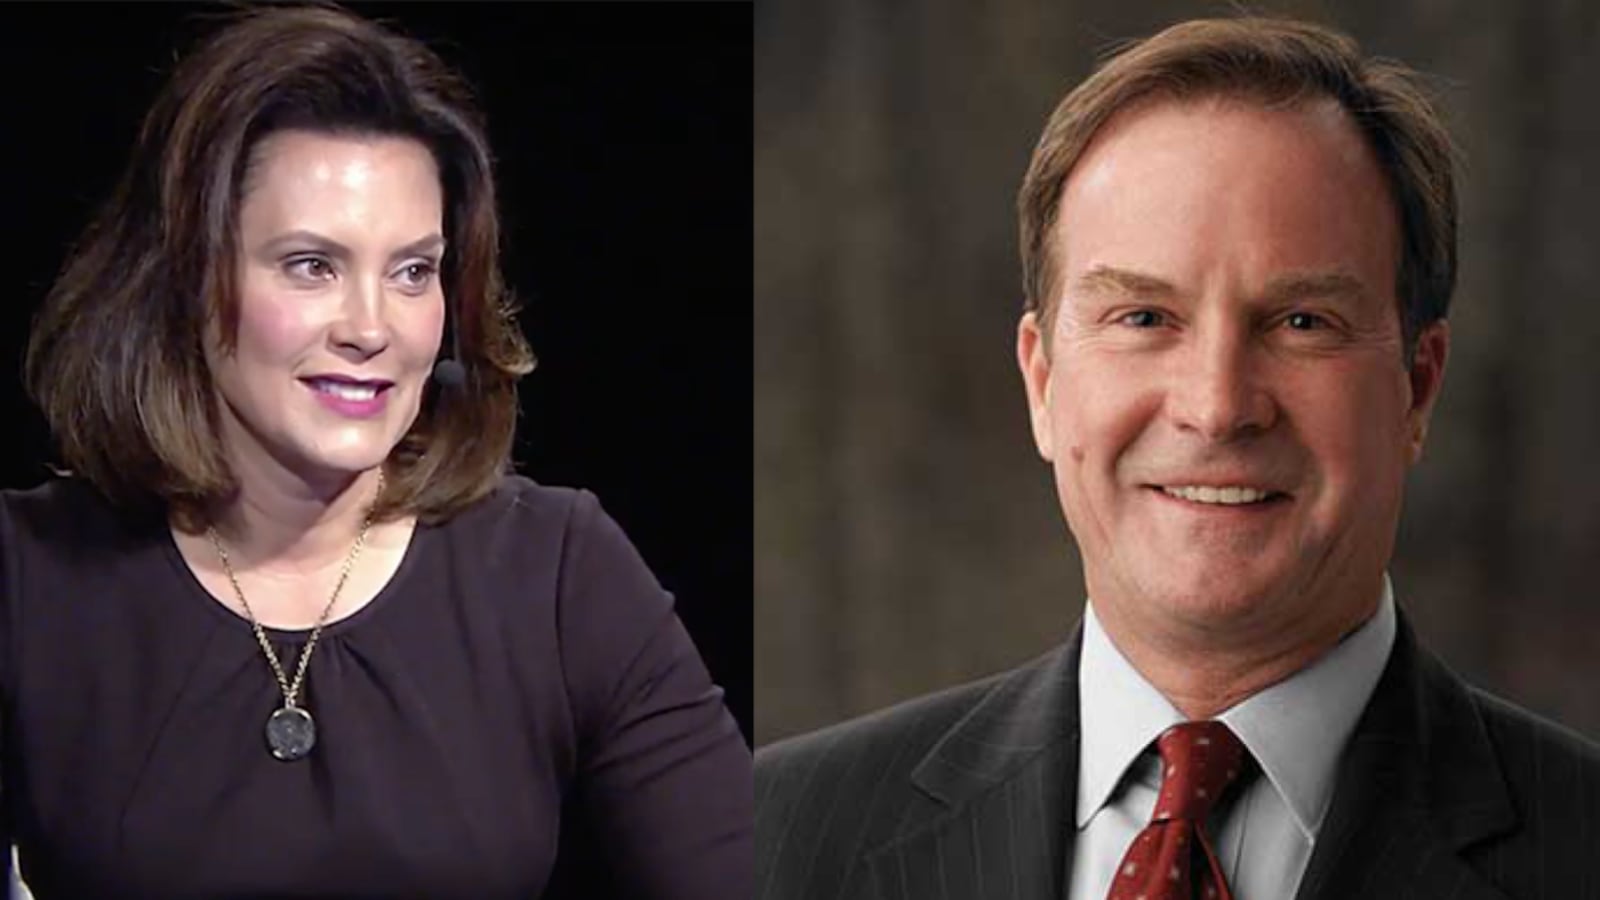 Democrat Gretchen Whitmer will face Republican Bill Schuette on November 6 in the race to become Michigan's next governor.